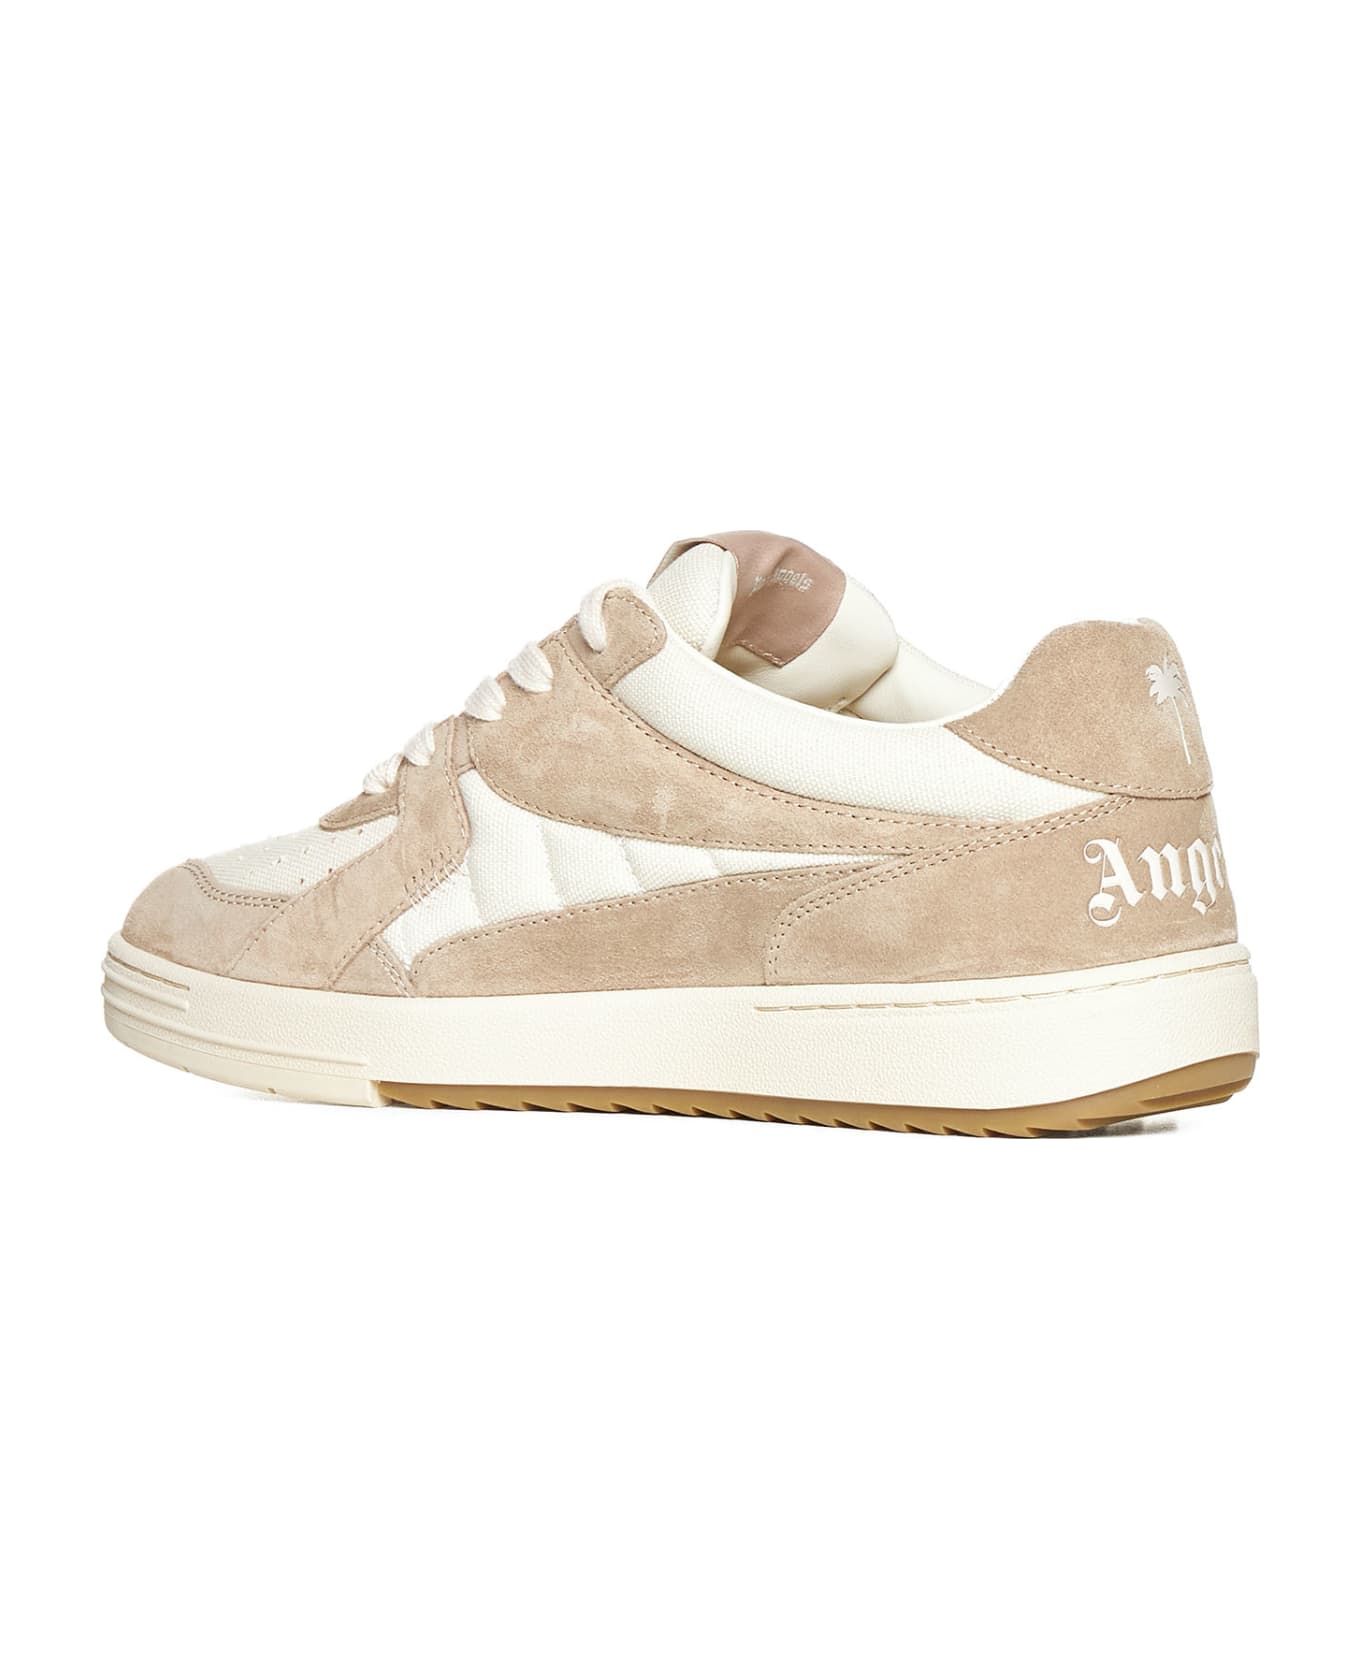 Palm Angels University Sneakers - White camel スニーカー